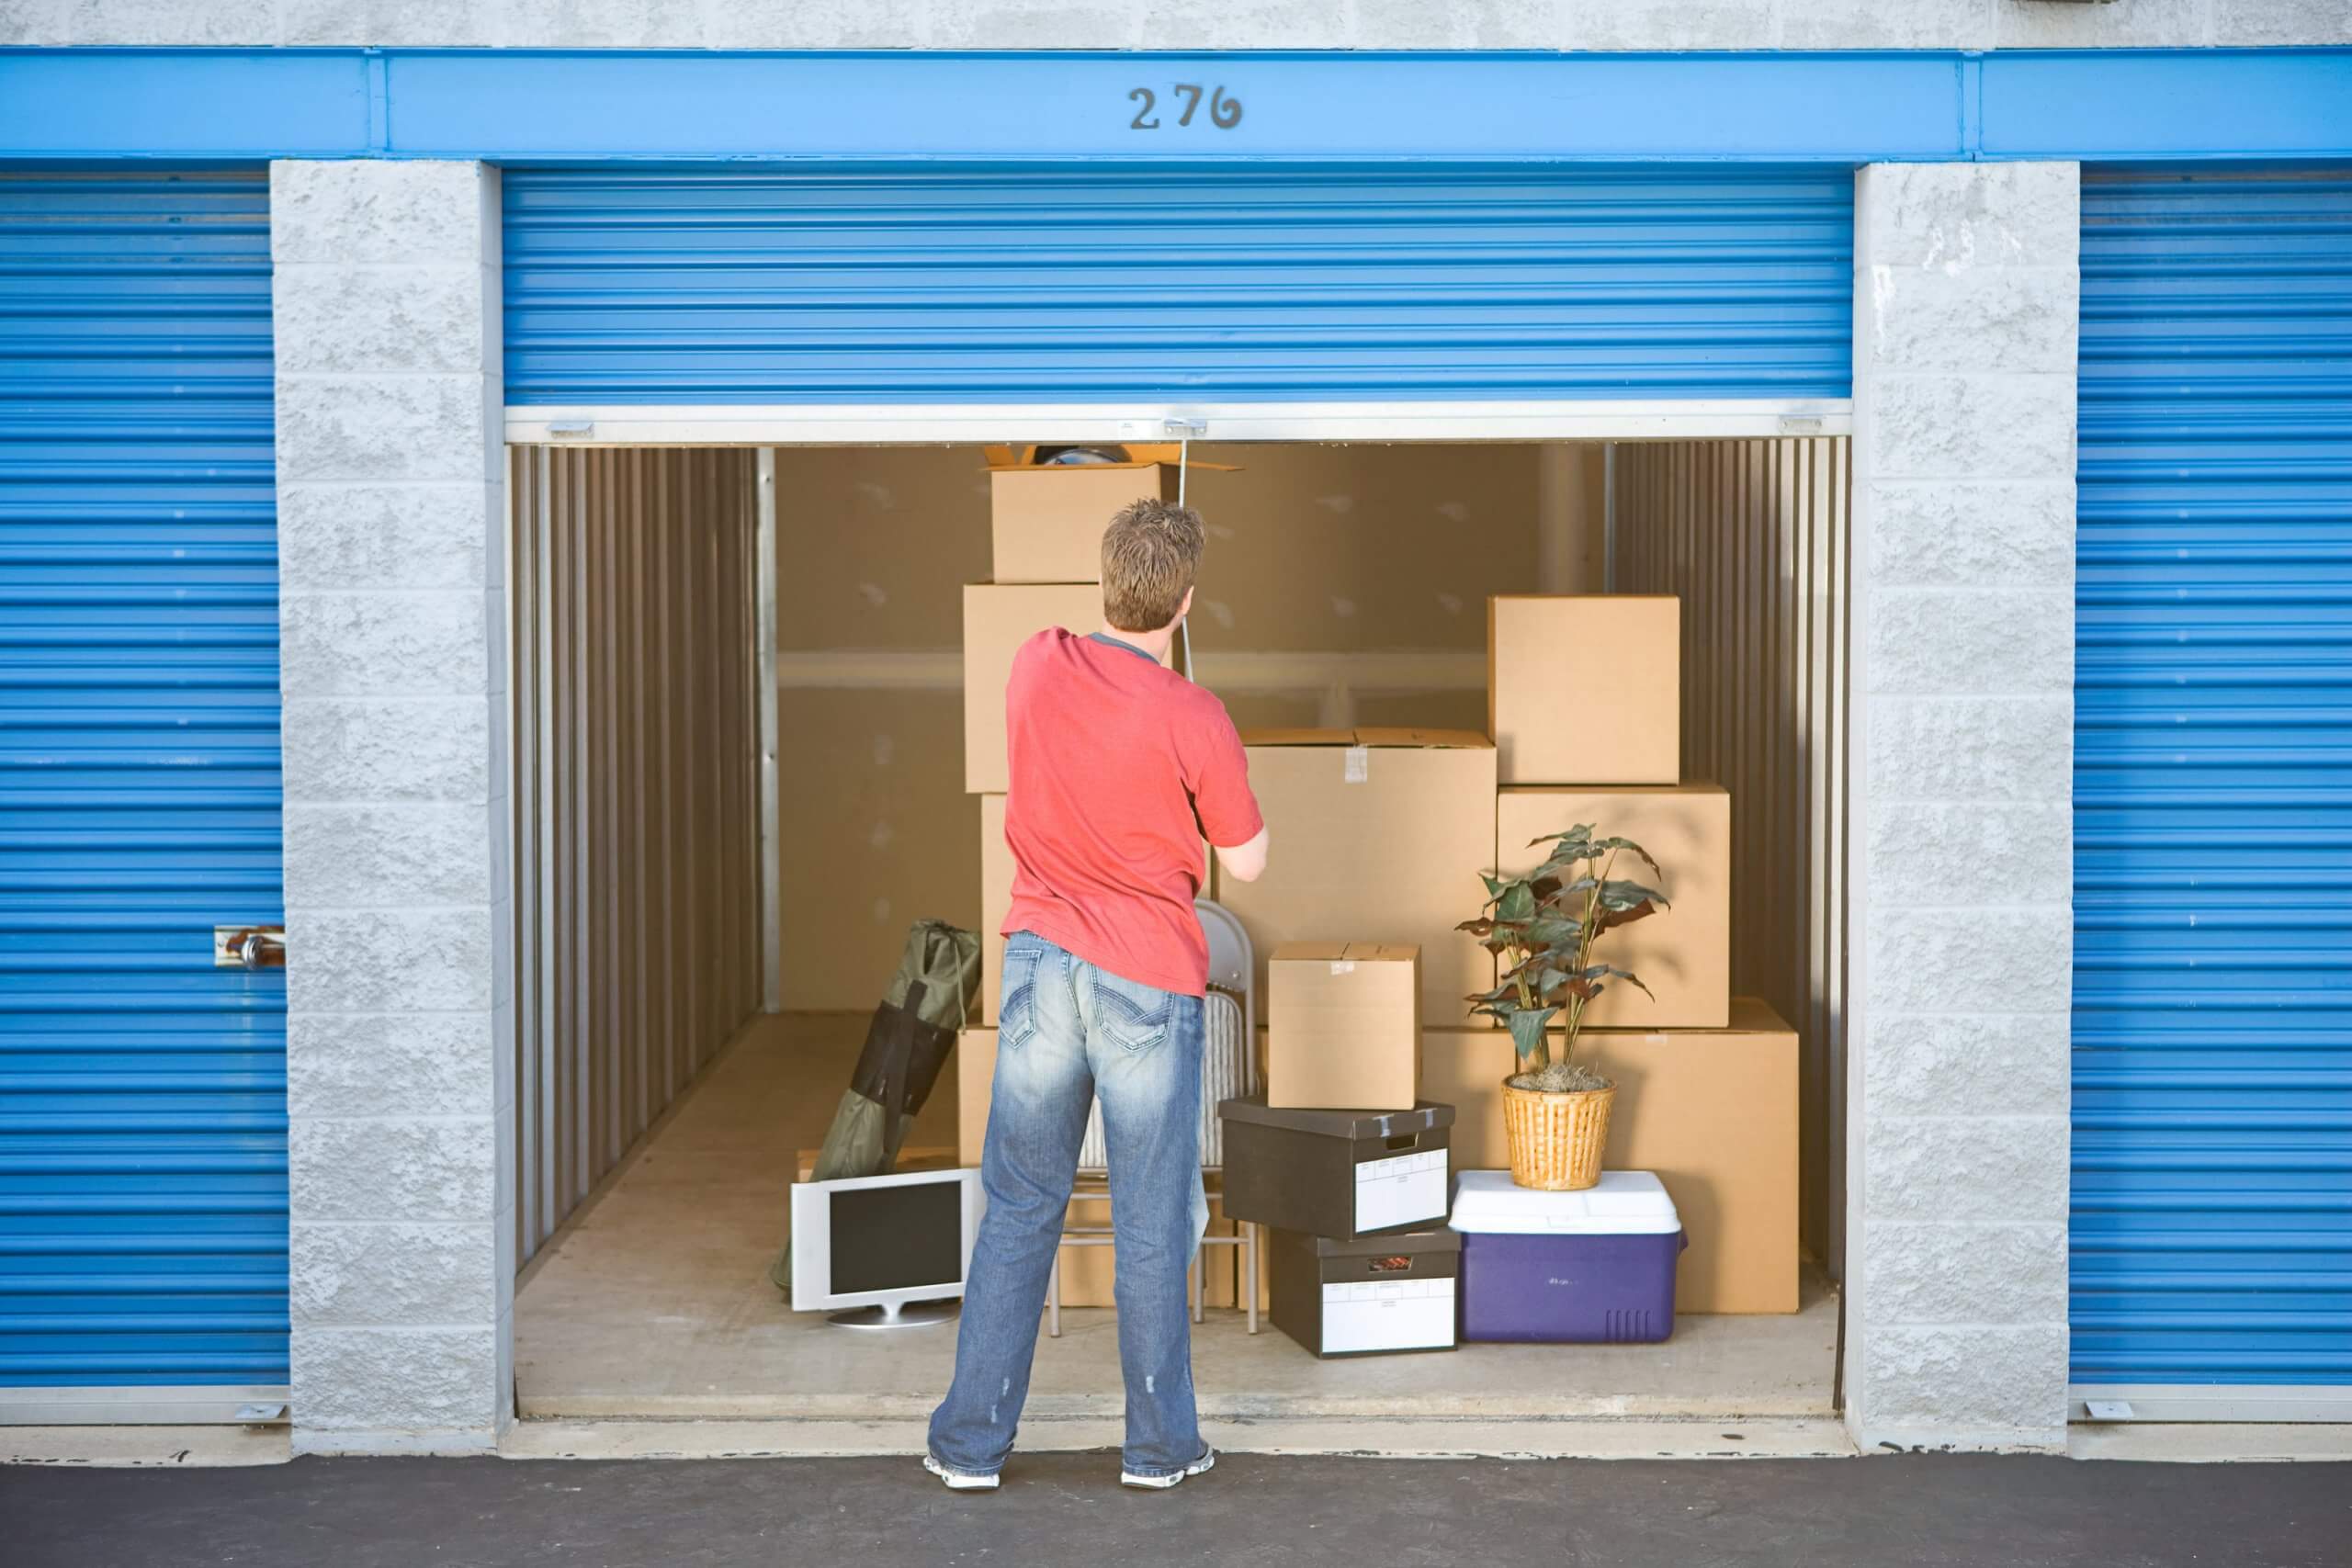 planning-to-rent-a-storage-unit-here-s-how-to-choose-one